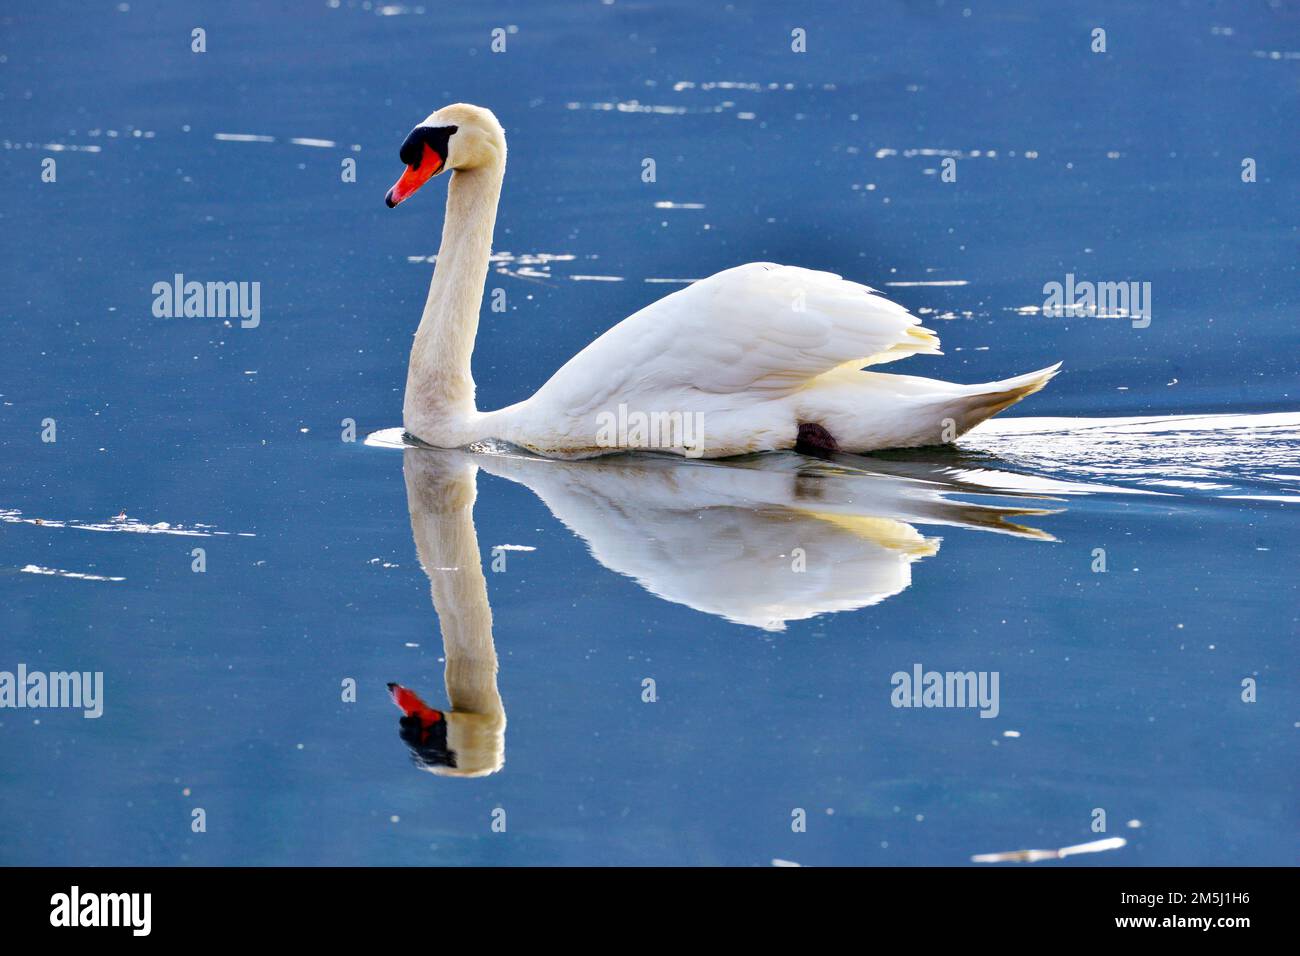 A white swan swims across the lake of Fimon, near Vicenza, Italy, March 18, 2022. Lake of Fimon is protected area and home to hundreds of plant and animal species. Studies show that spending time in nature can help build and maintain psychological resilience and readiness. Lake Fimon has formed at the end of third phase of the quaternary ice age and has undergone major changes arriving at its actual form. ( U.S. Army Photos by Paolo Bovo) Stock Photo